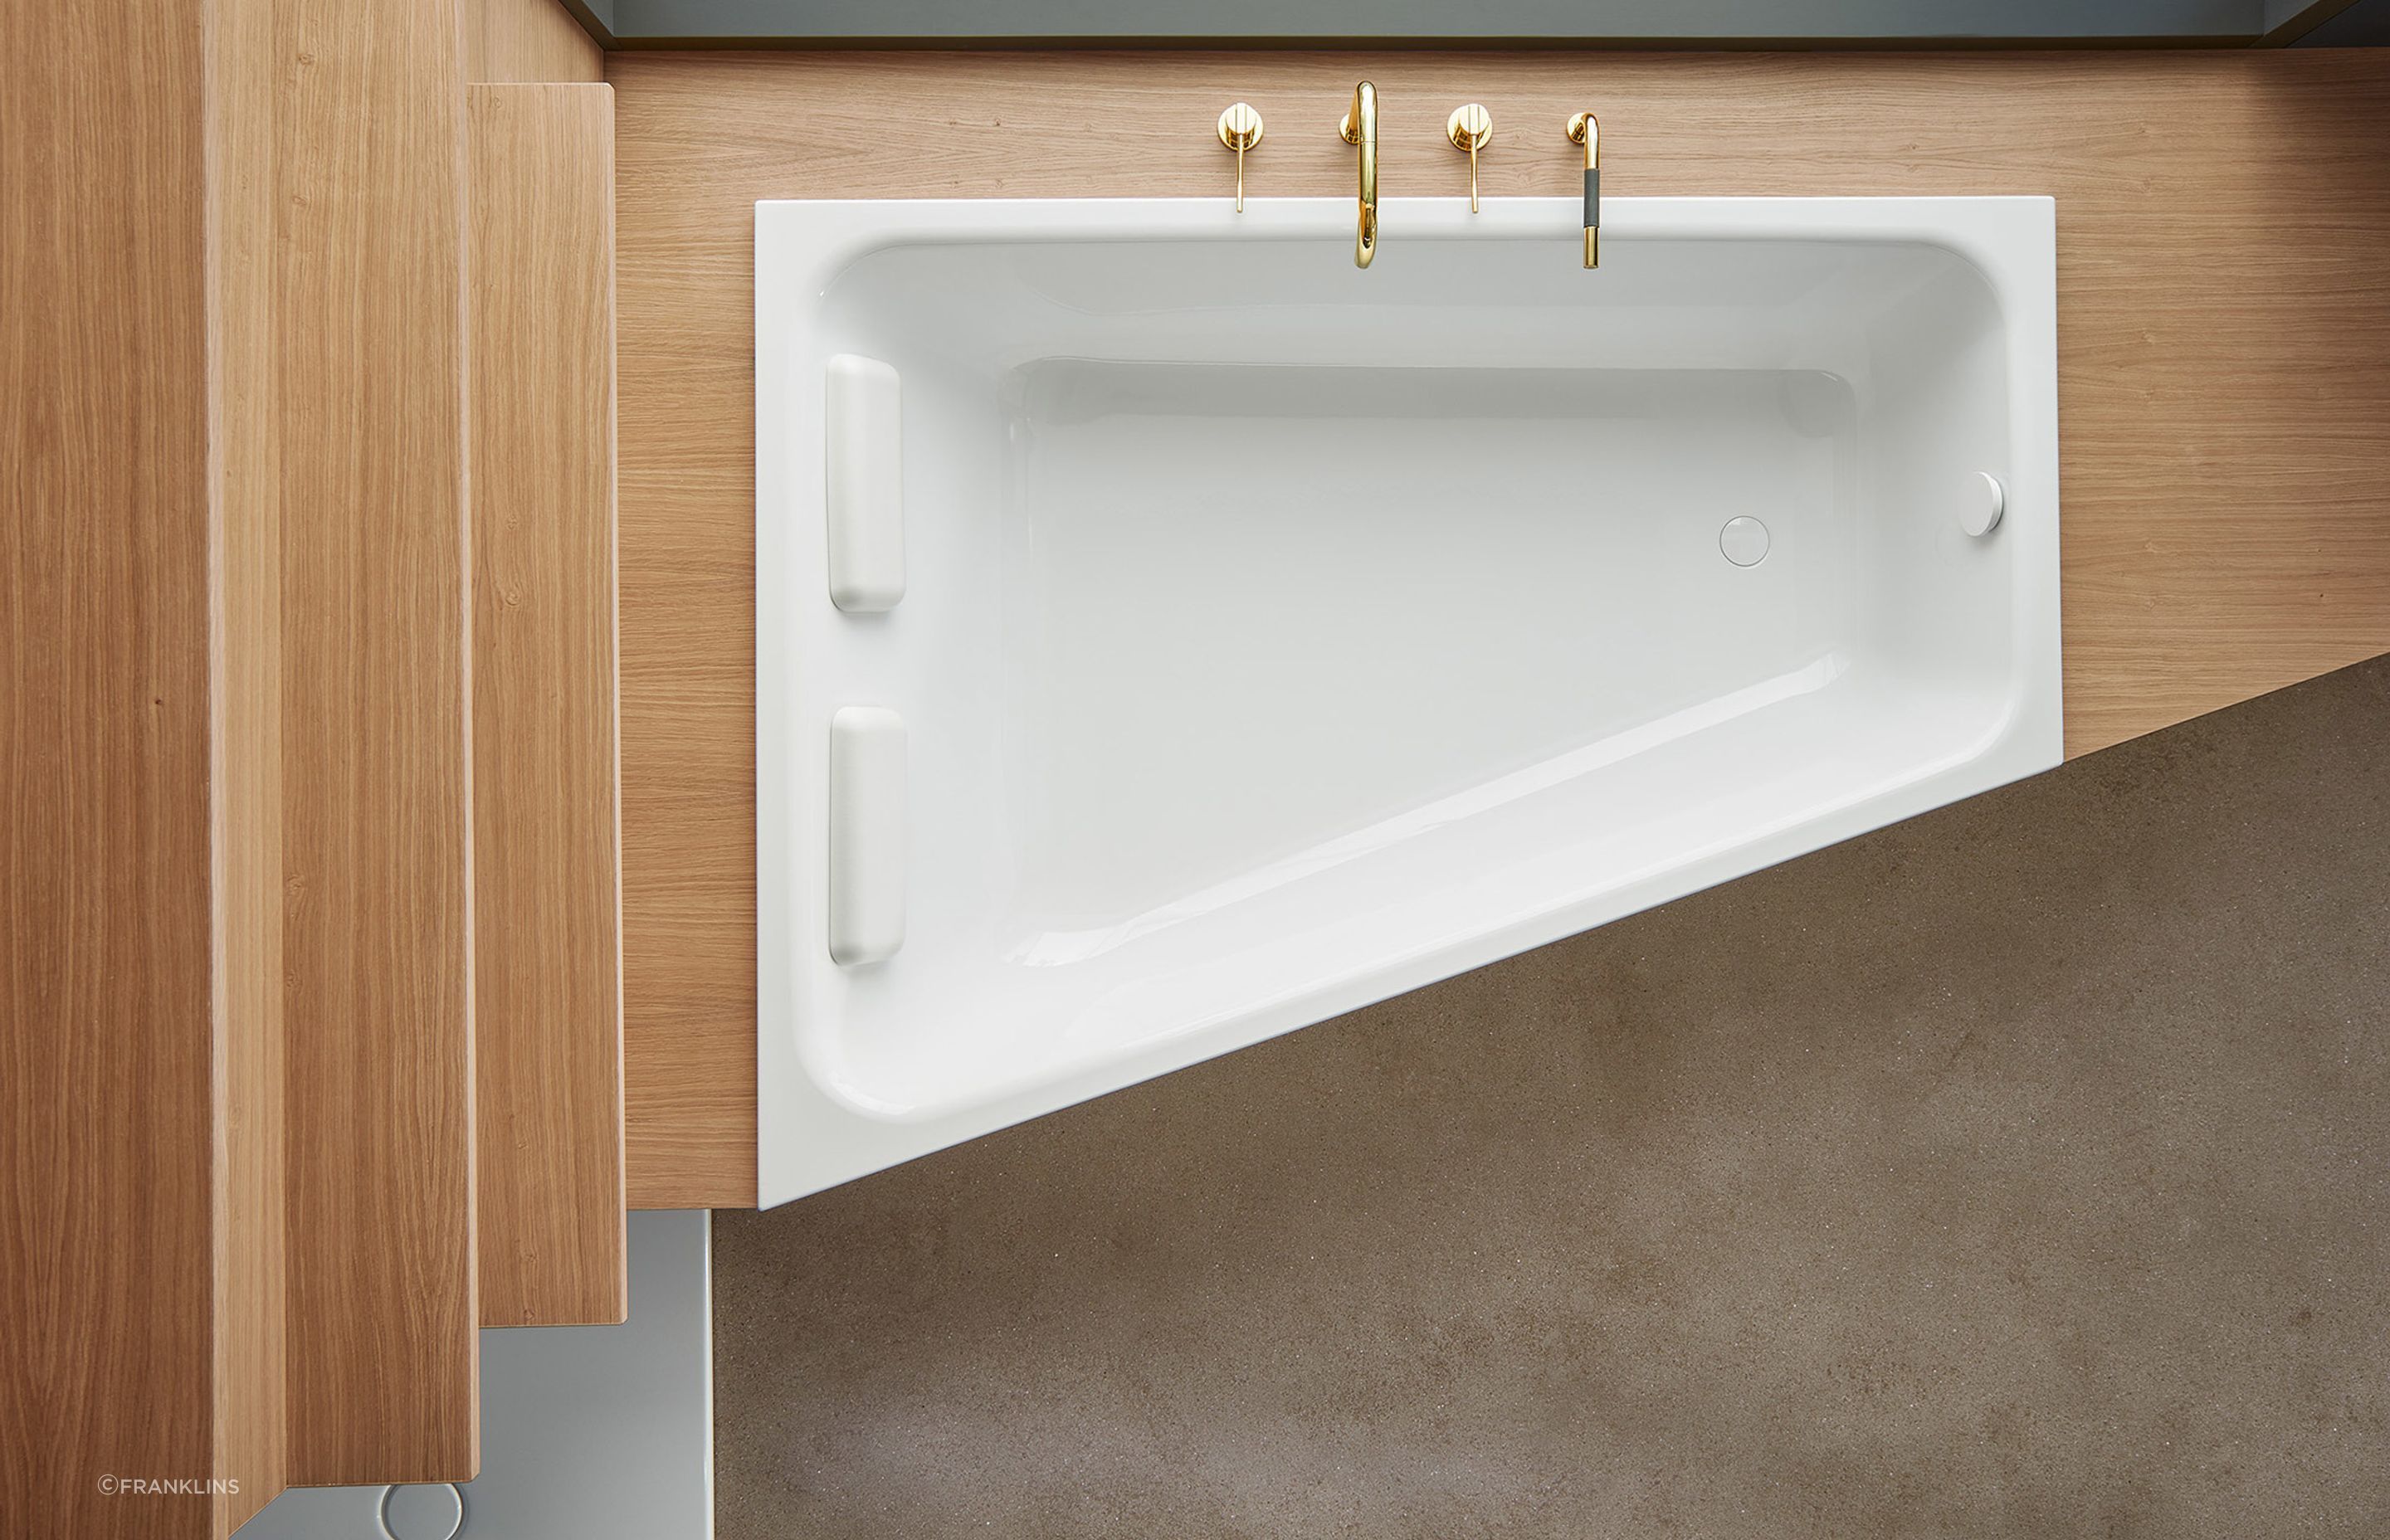 While most built in baths tend to be similar in style, you will find some exceptions like the stylish BetteSpace L Drop-in Bath Tub